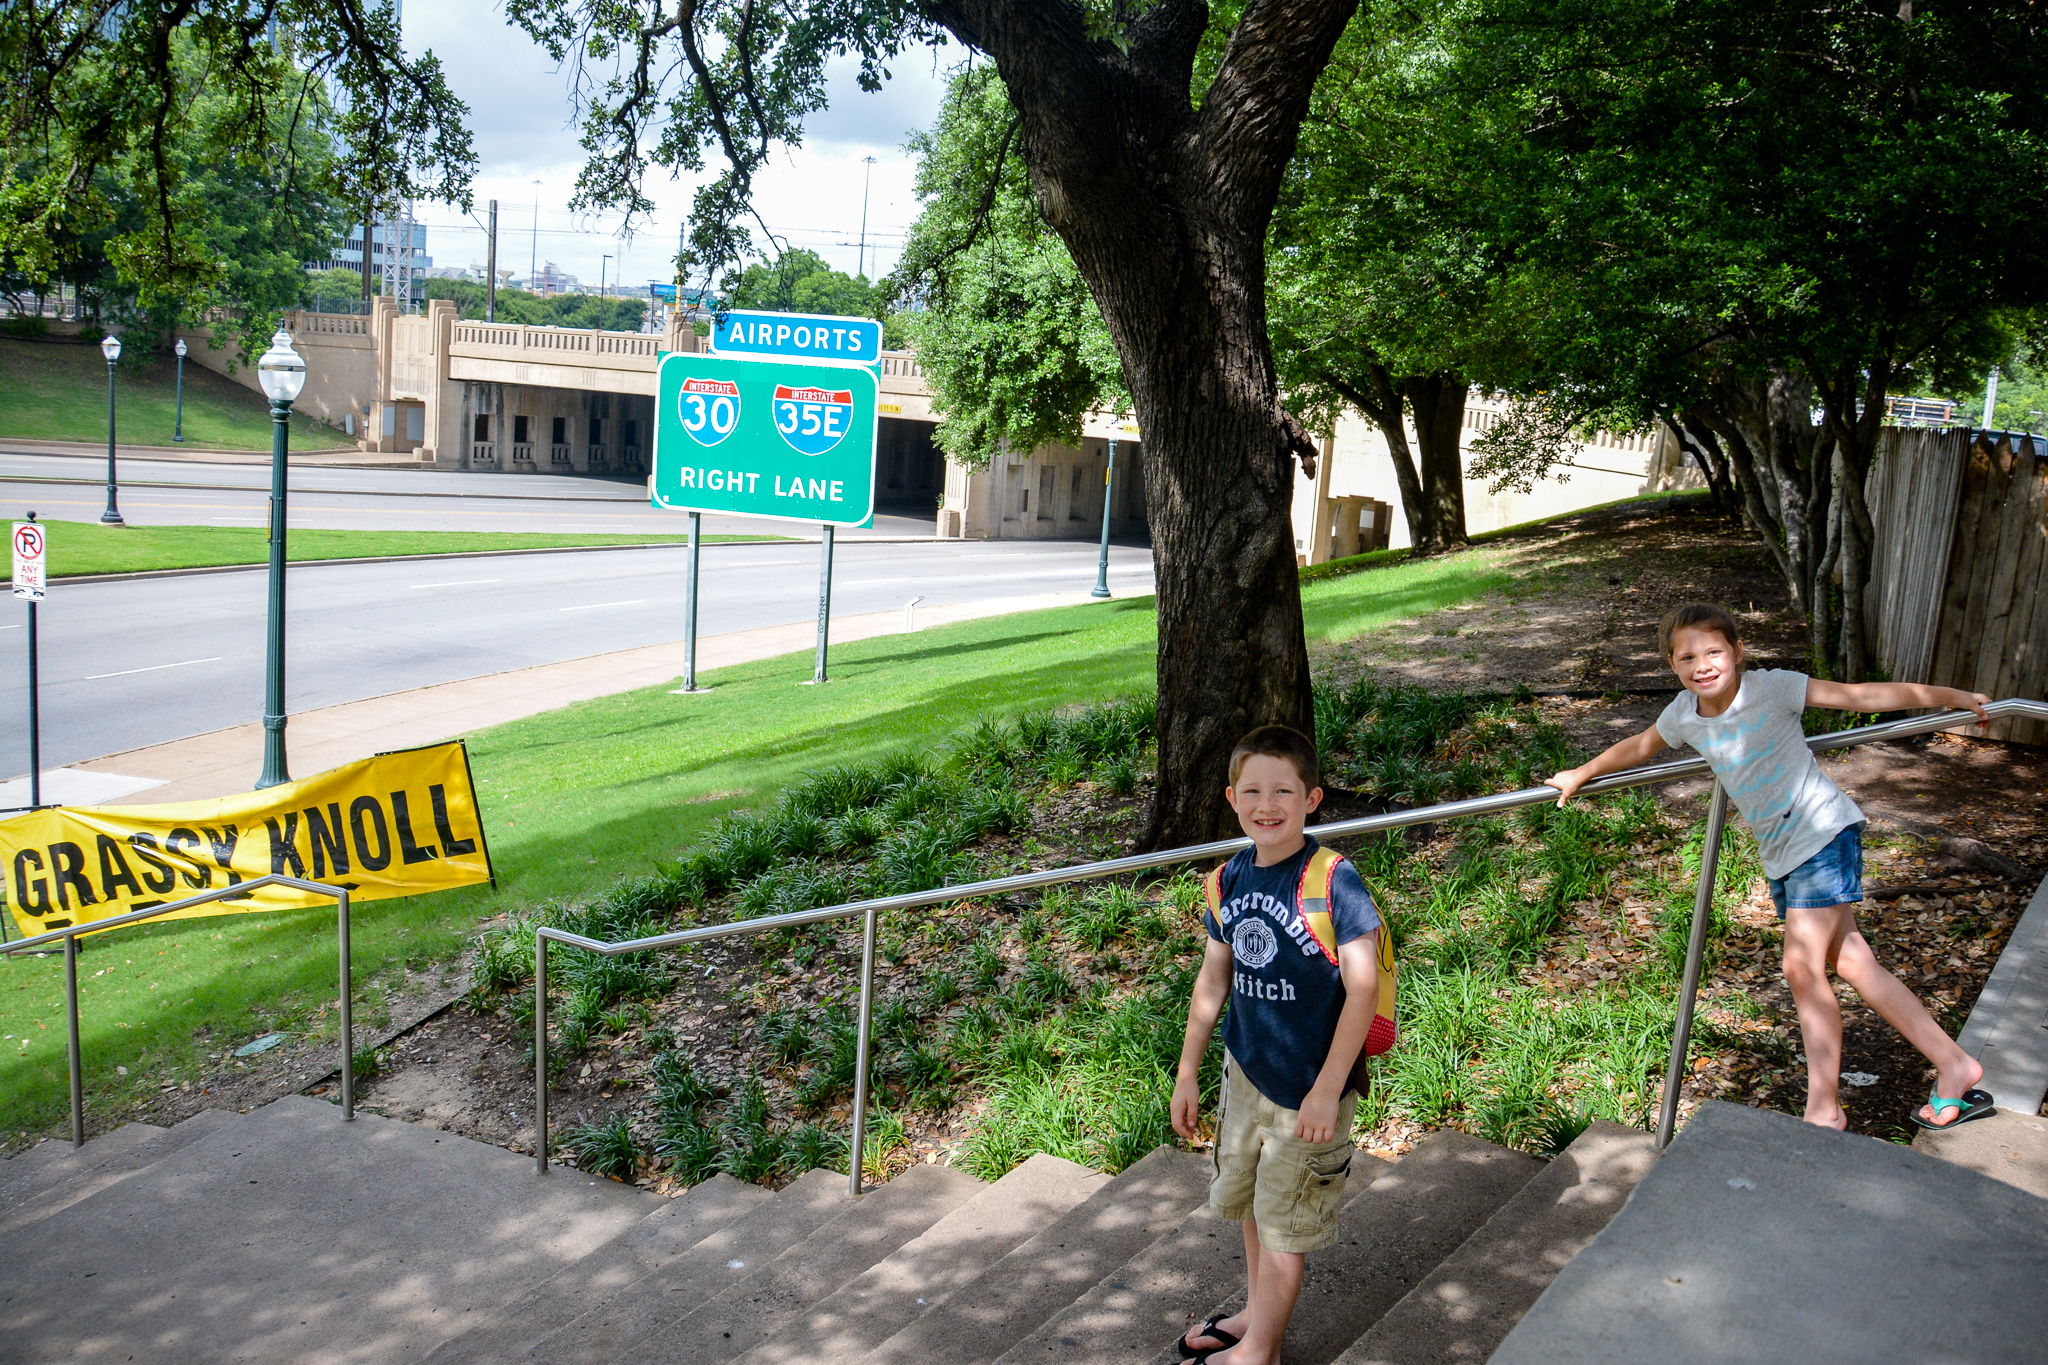 Kids next to the Grassy Knoll in Dallas TX